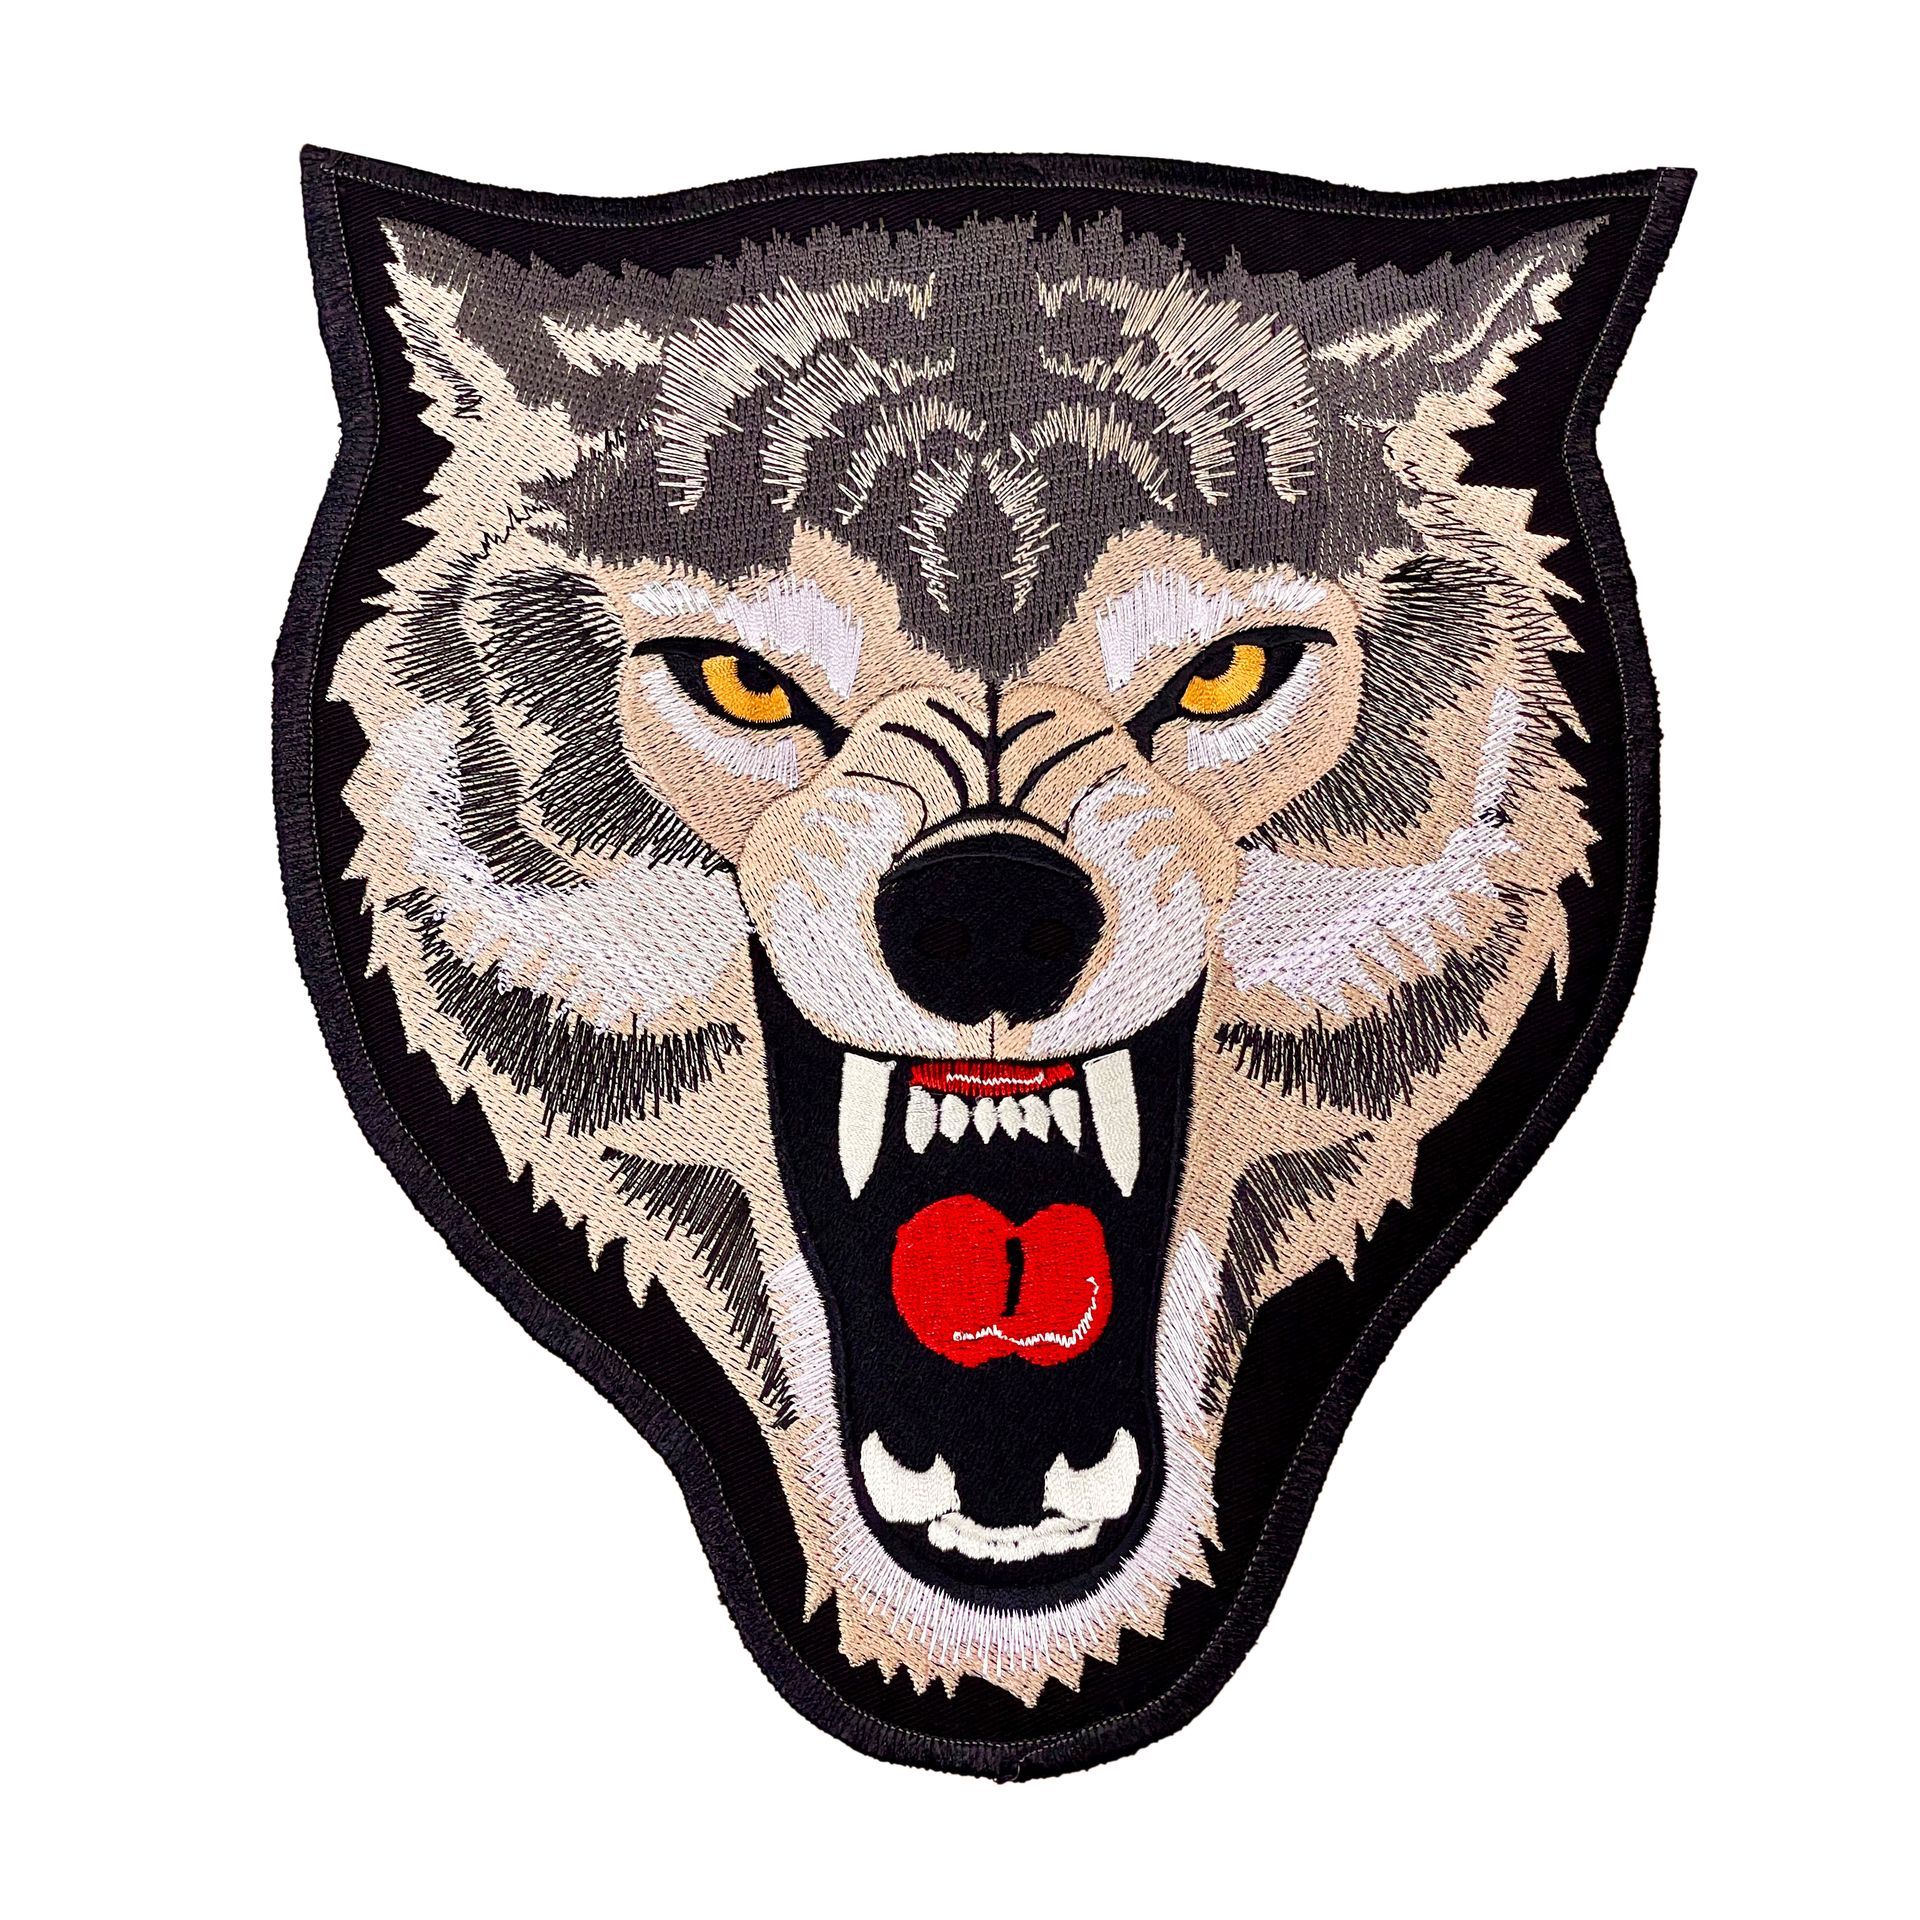 A patch of a wolf 's head with its mouth open